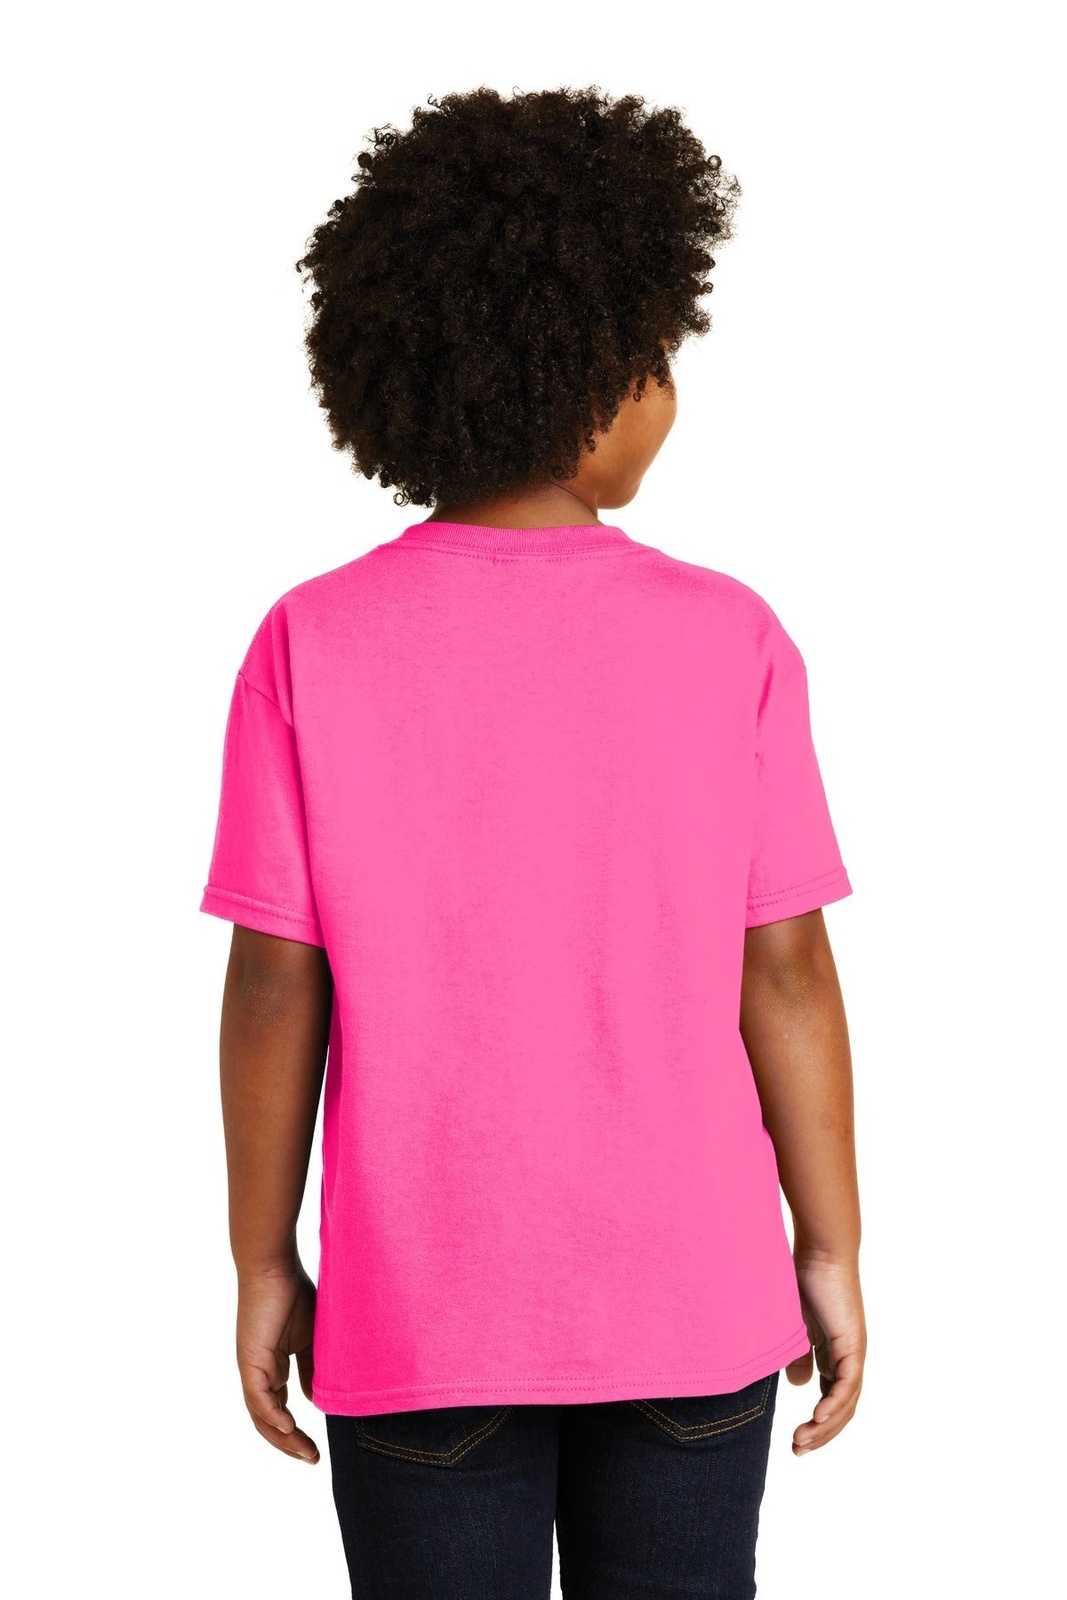 Gildan 5000B Youth Heavy Cotton 100% Cotton T-Shirt - Safety Pink - HIT a Double